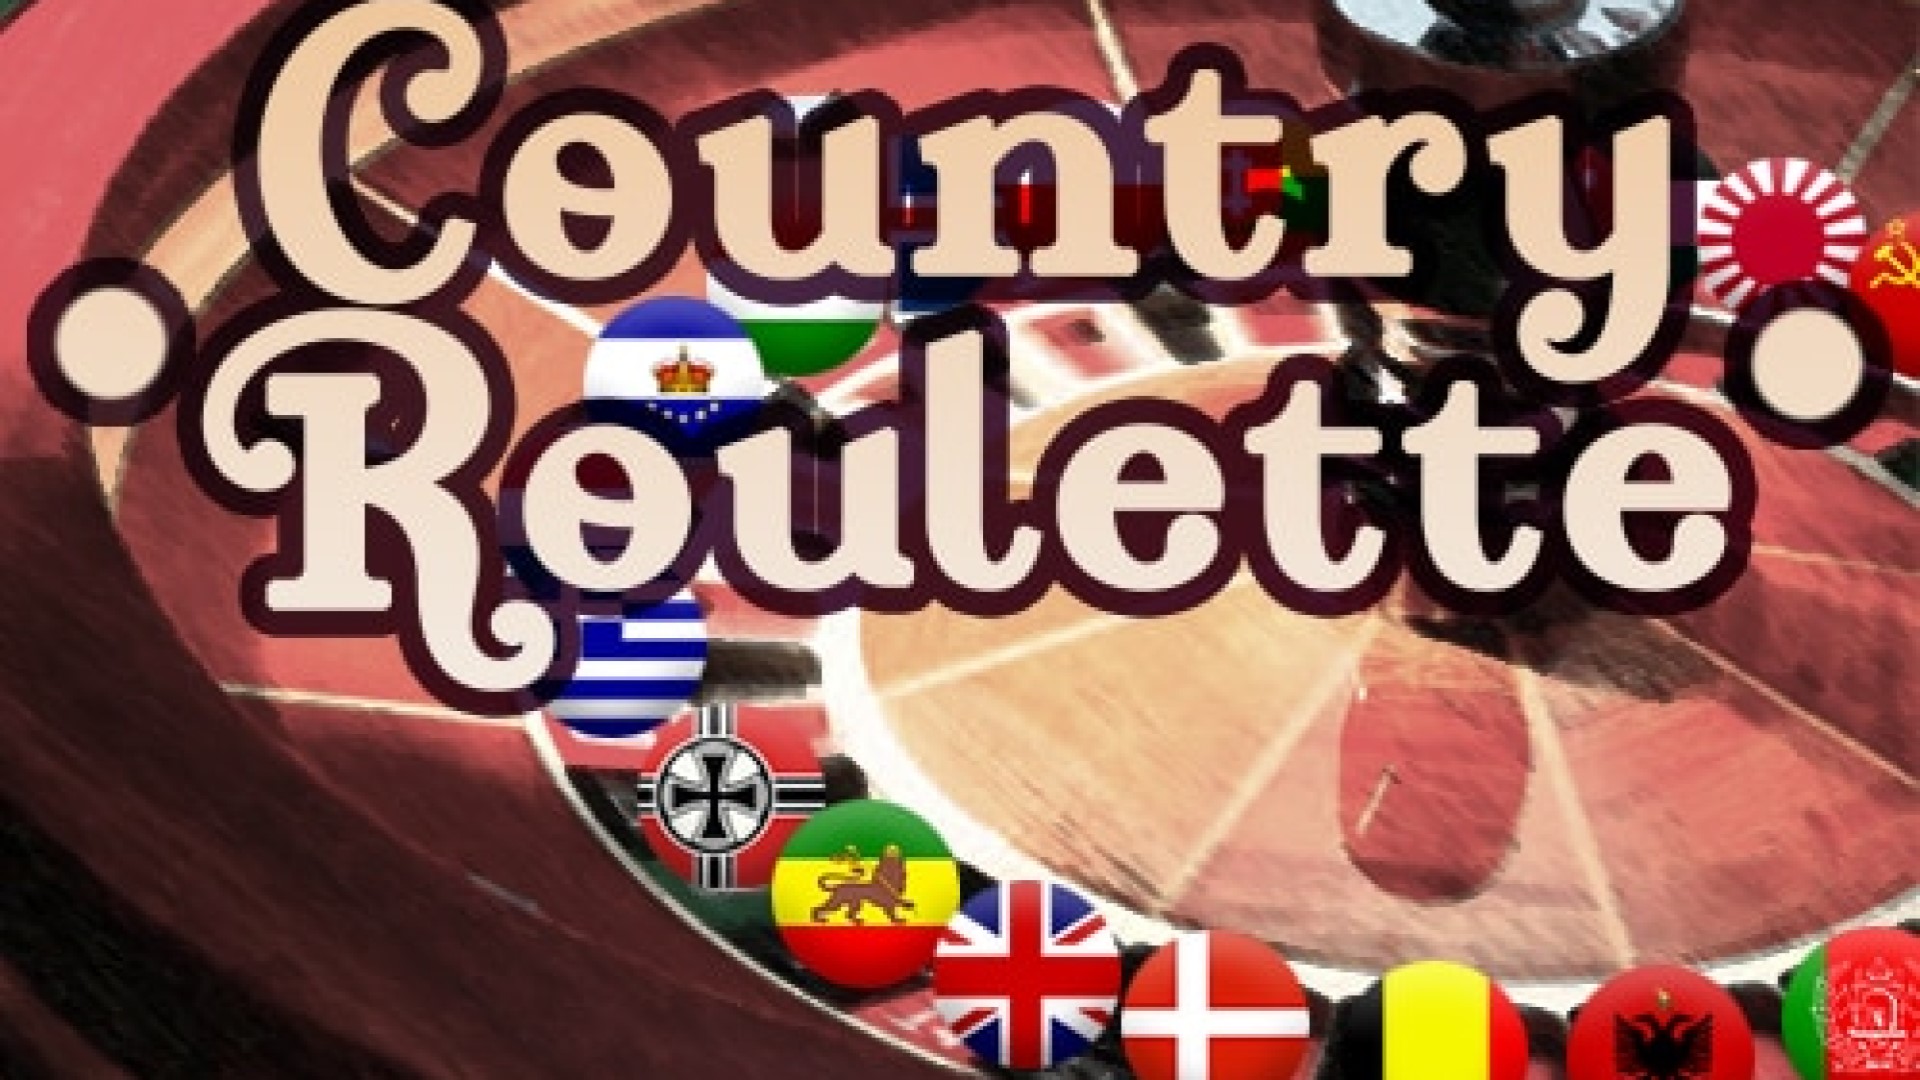 Hearts of Iron 4 mods: a roulette wheel with the flags of different nations on the spaces.